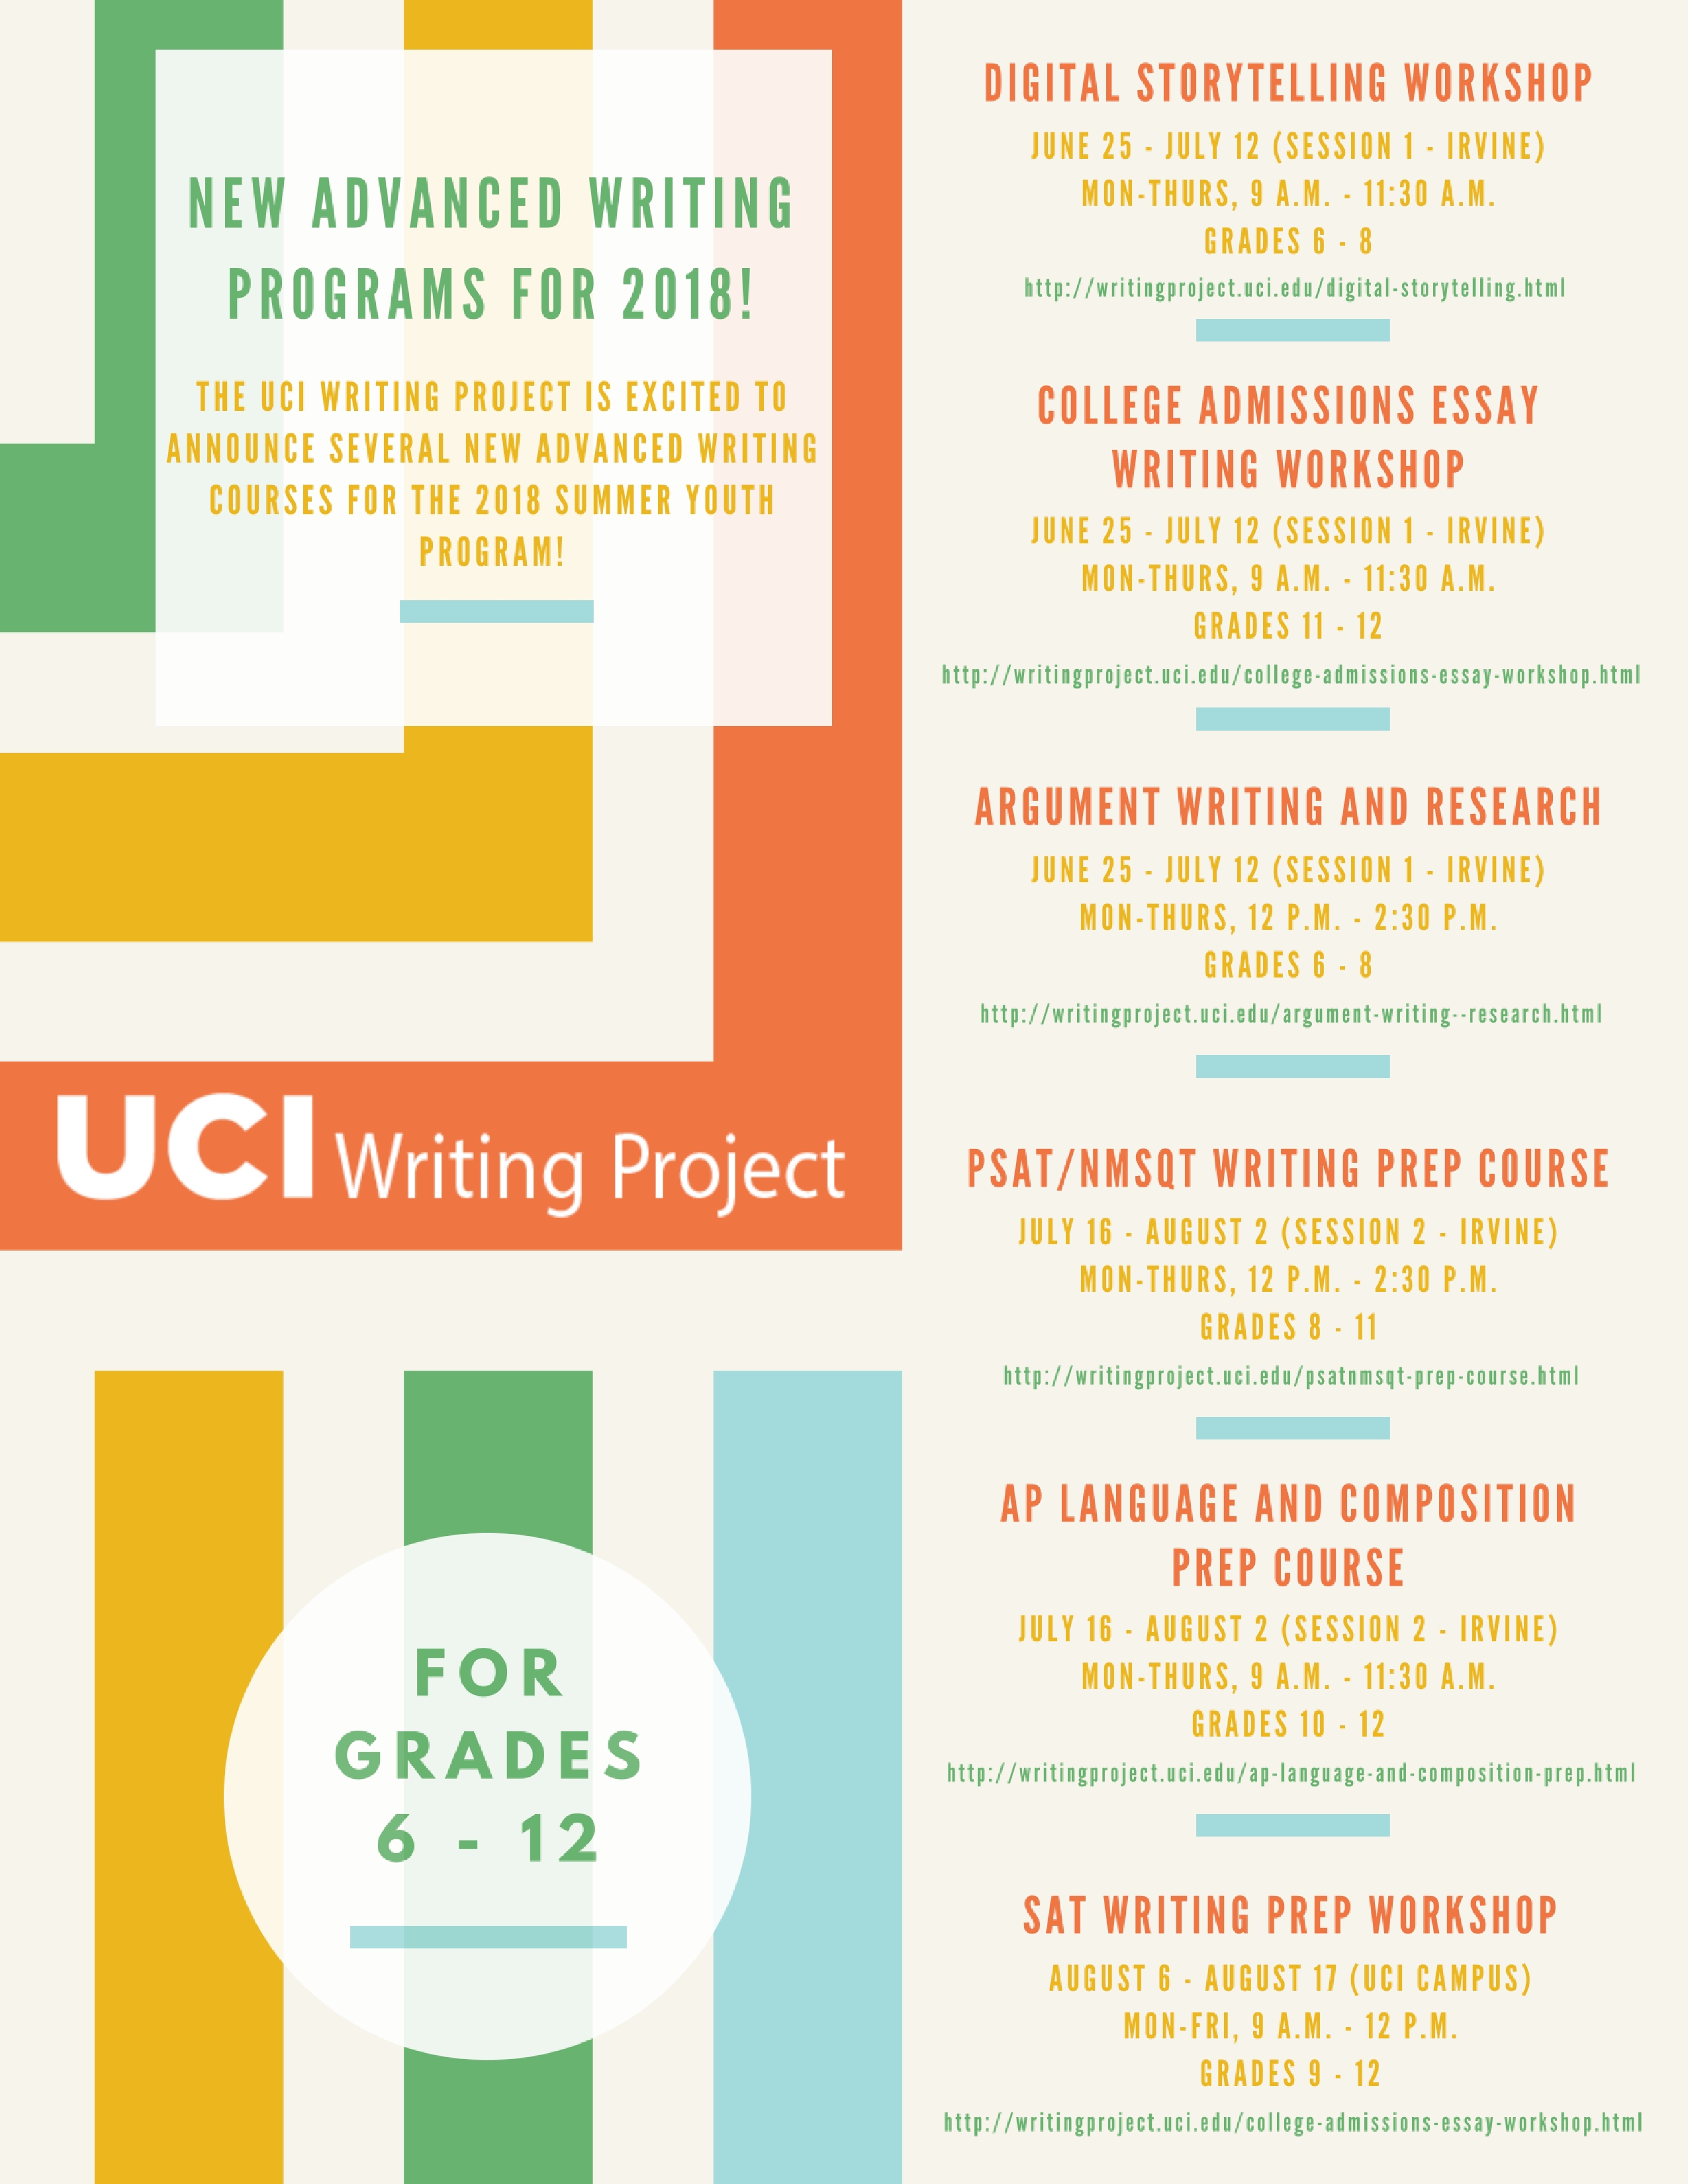 New Advanced Writing Programs for 2018!